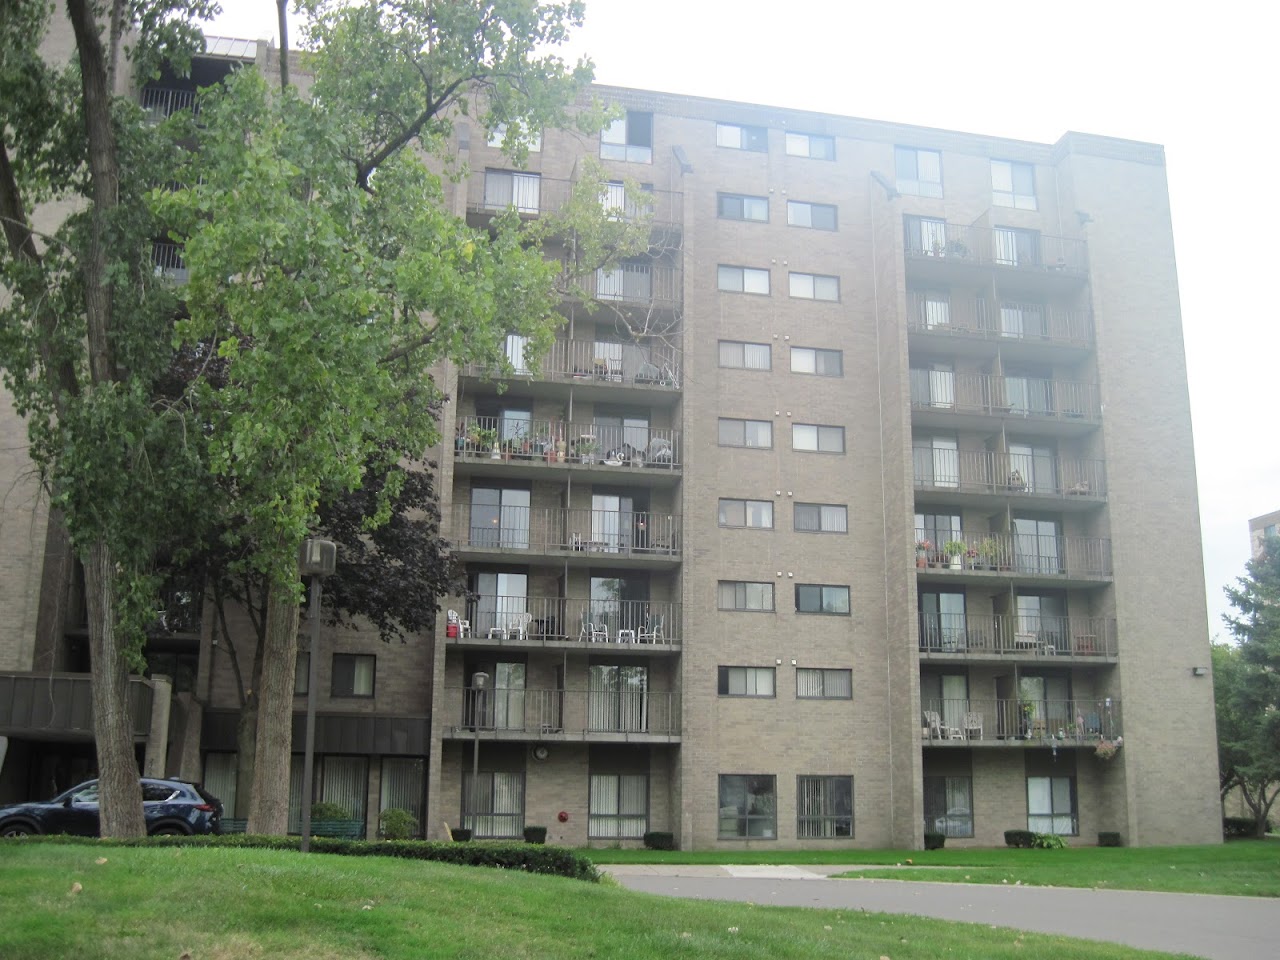 Photo of MADISON III MANOR. Affordable housing located at 27795 DEQUINDRE RD MADISON HEIGHTS, MI 48071